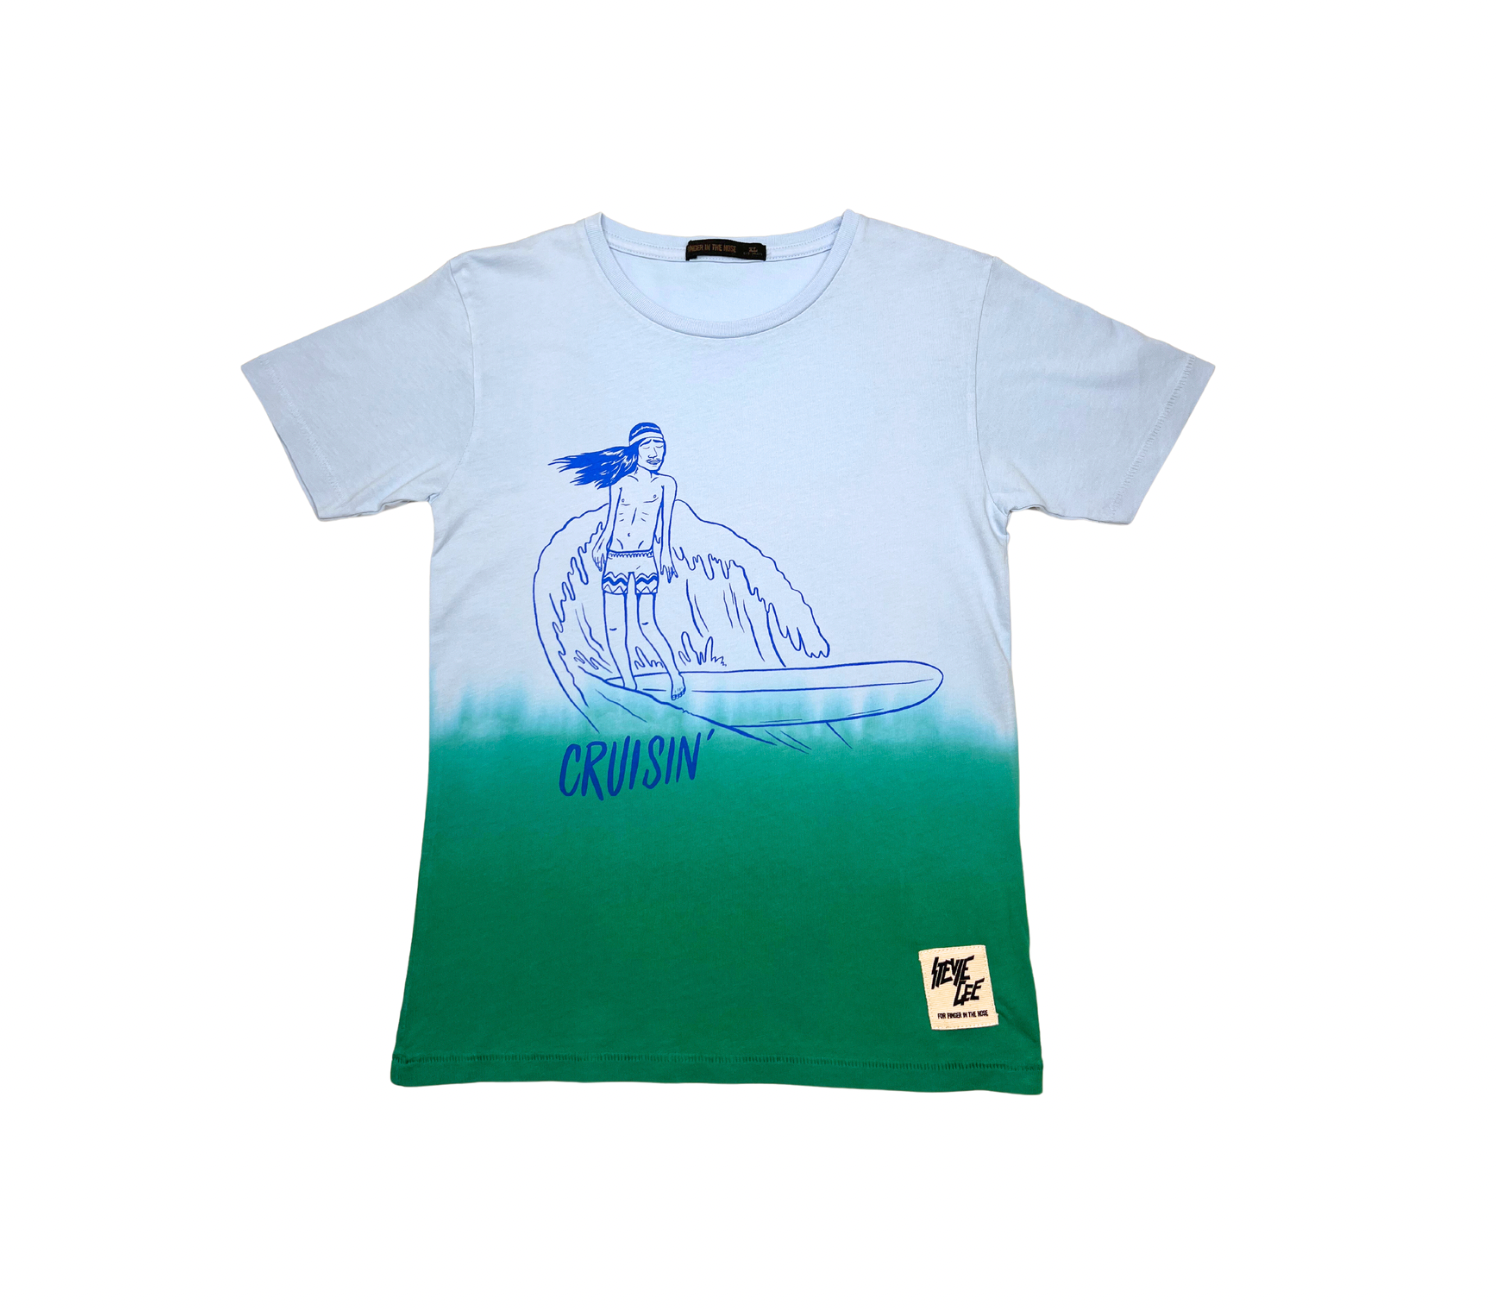 FINGER IN THE NOSE - T-shirt surf "cruisin'" - 8/9 ans